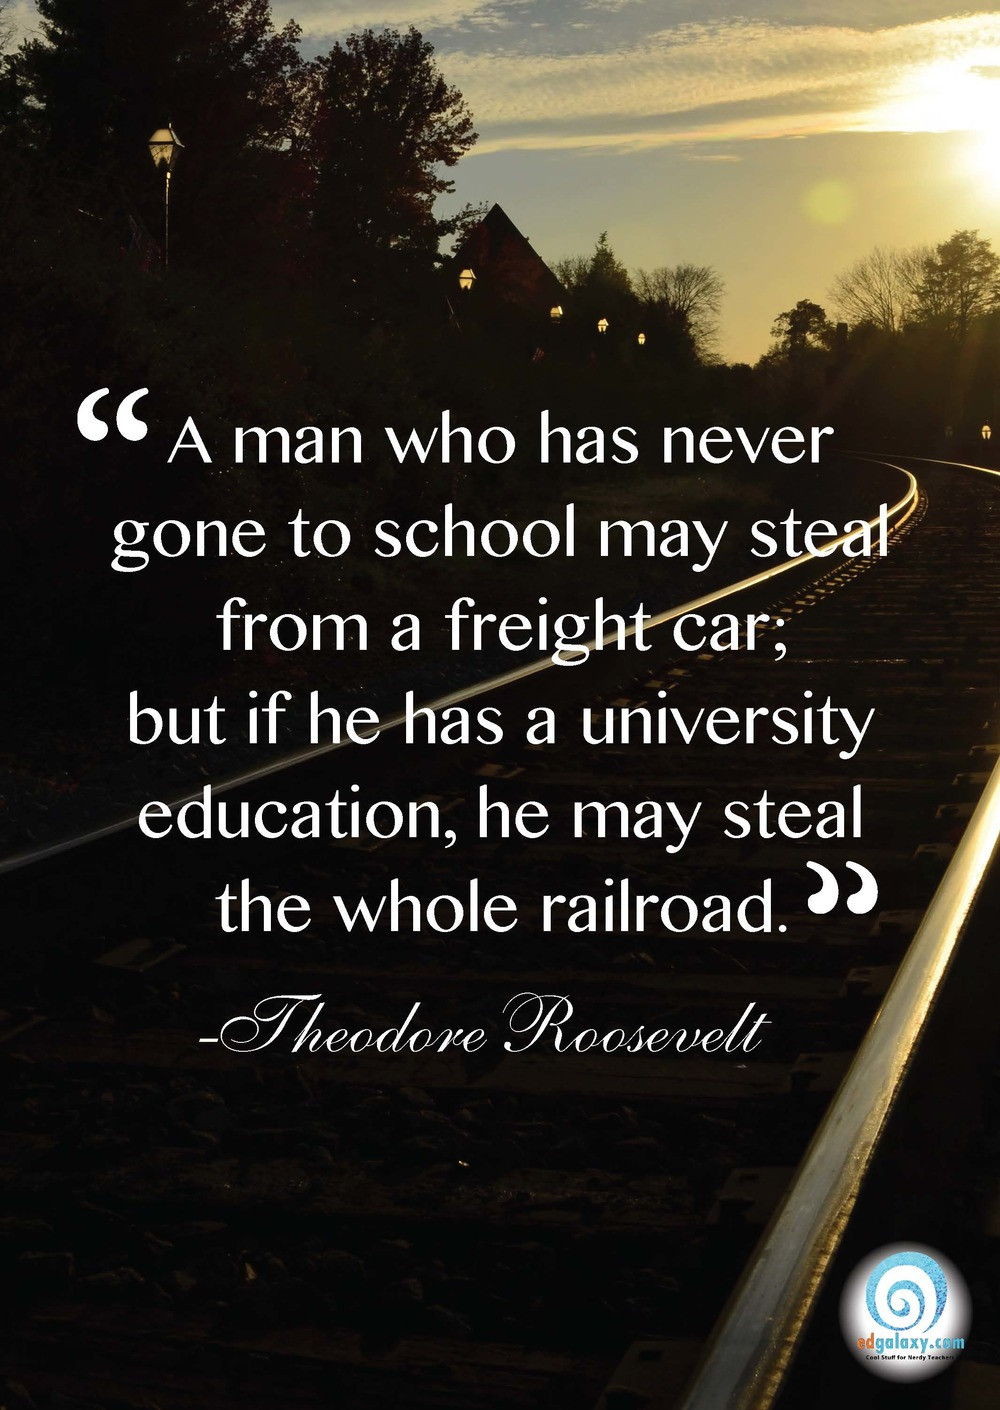 Positive Education Quotes
 Education Quotes Famous Quotes for teachers and Students